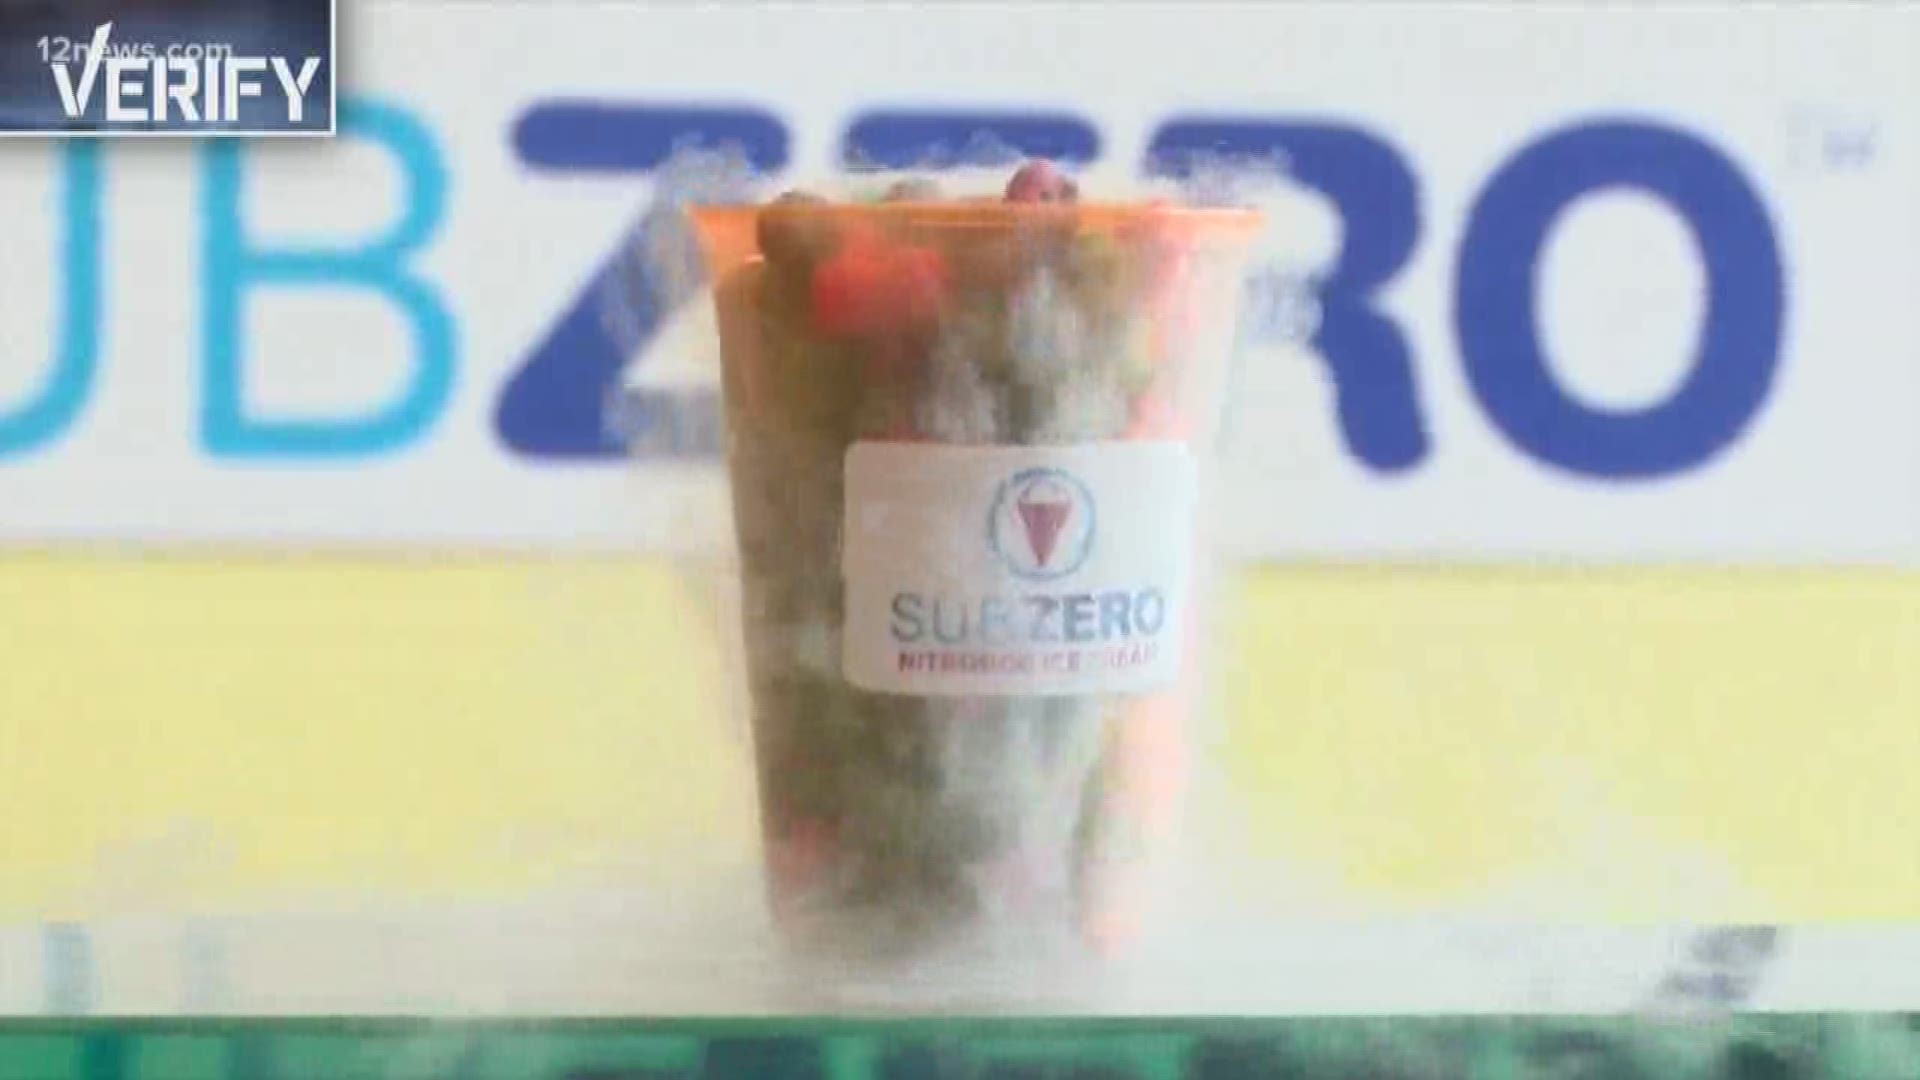 It's a frozen, liquid nitrogen treat that allows you to breath out "dragon's breath" from your nose and mouth after eating it. But the FDA now says it might be too dangerous to eat. We verify!